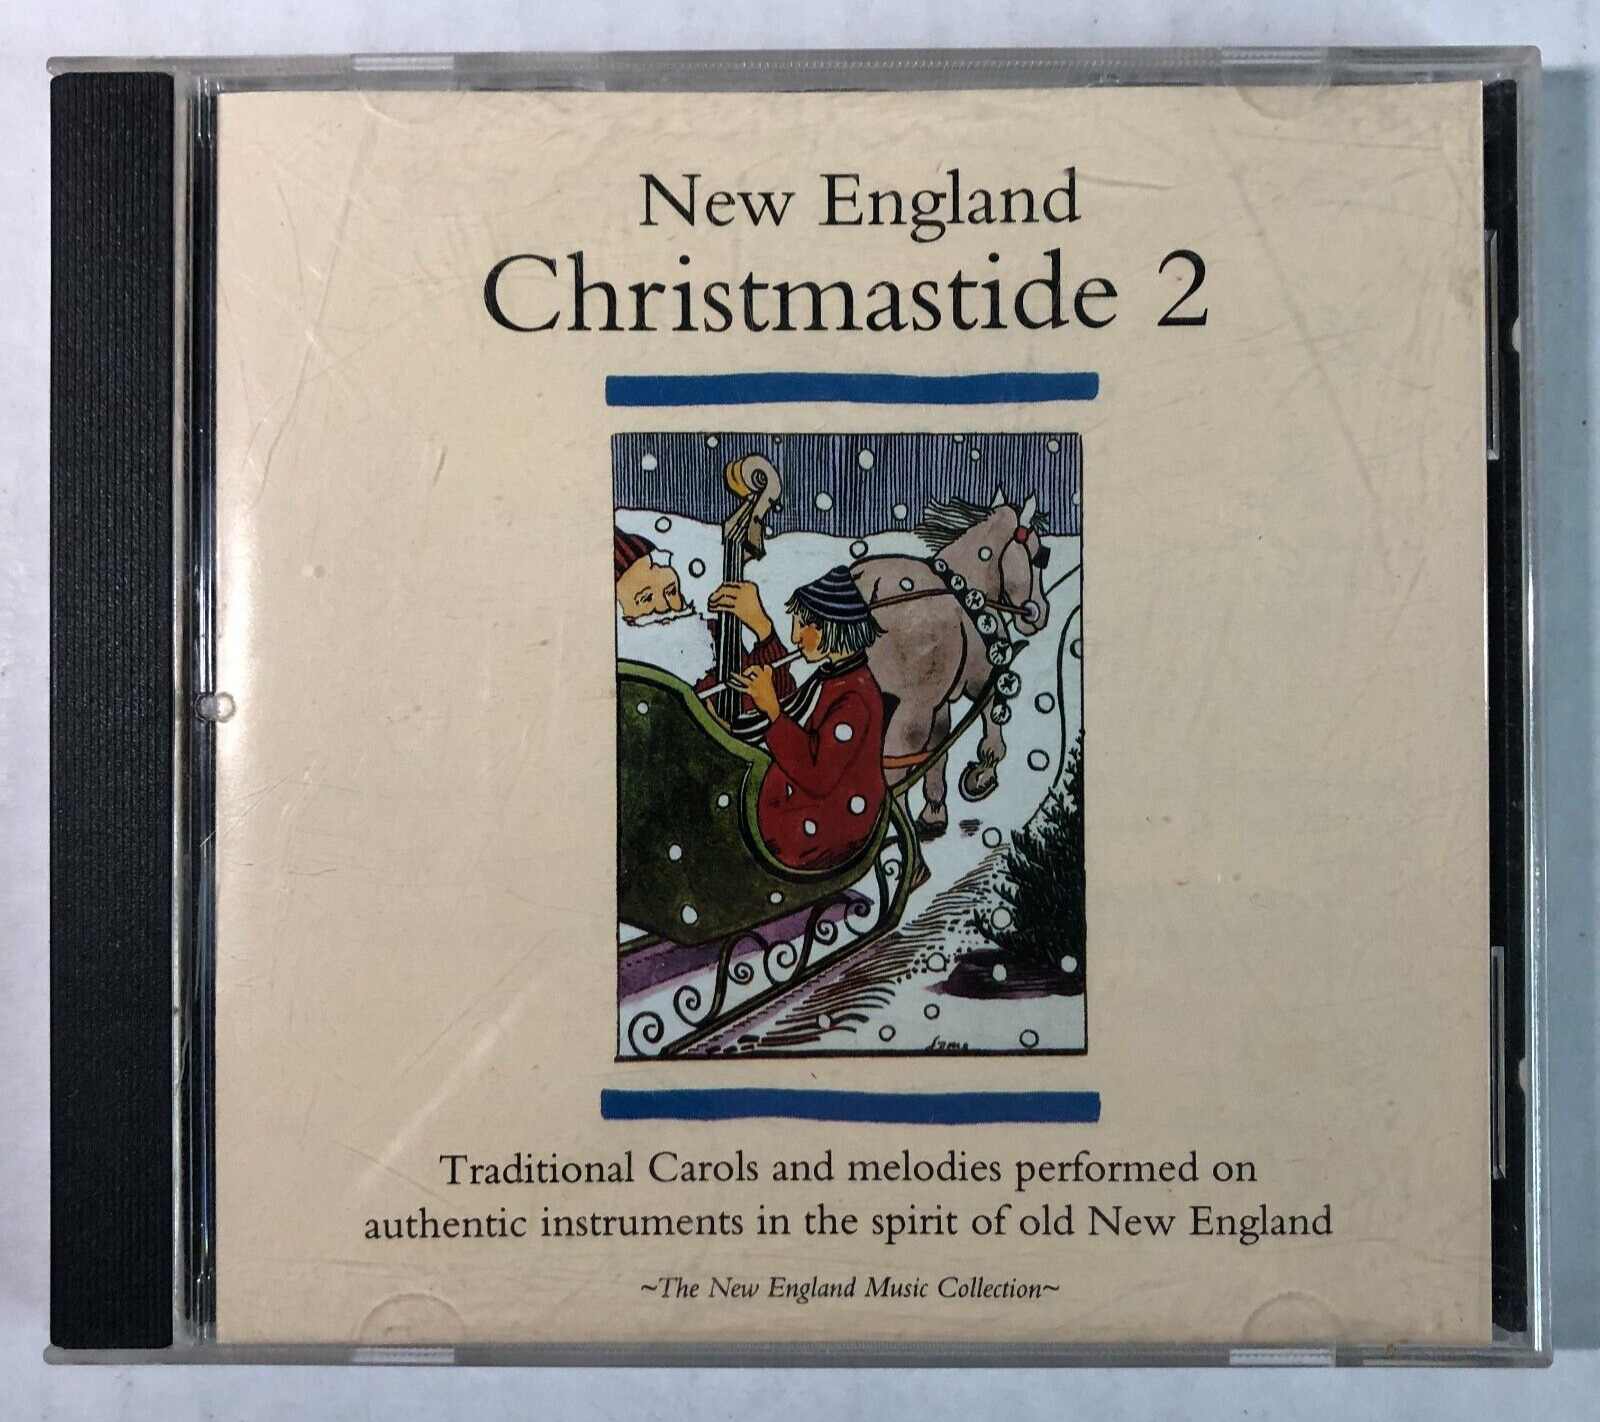 New England Christmastide 2 (CD, North Star Records) Traditional Carols Melodies